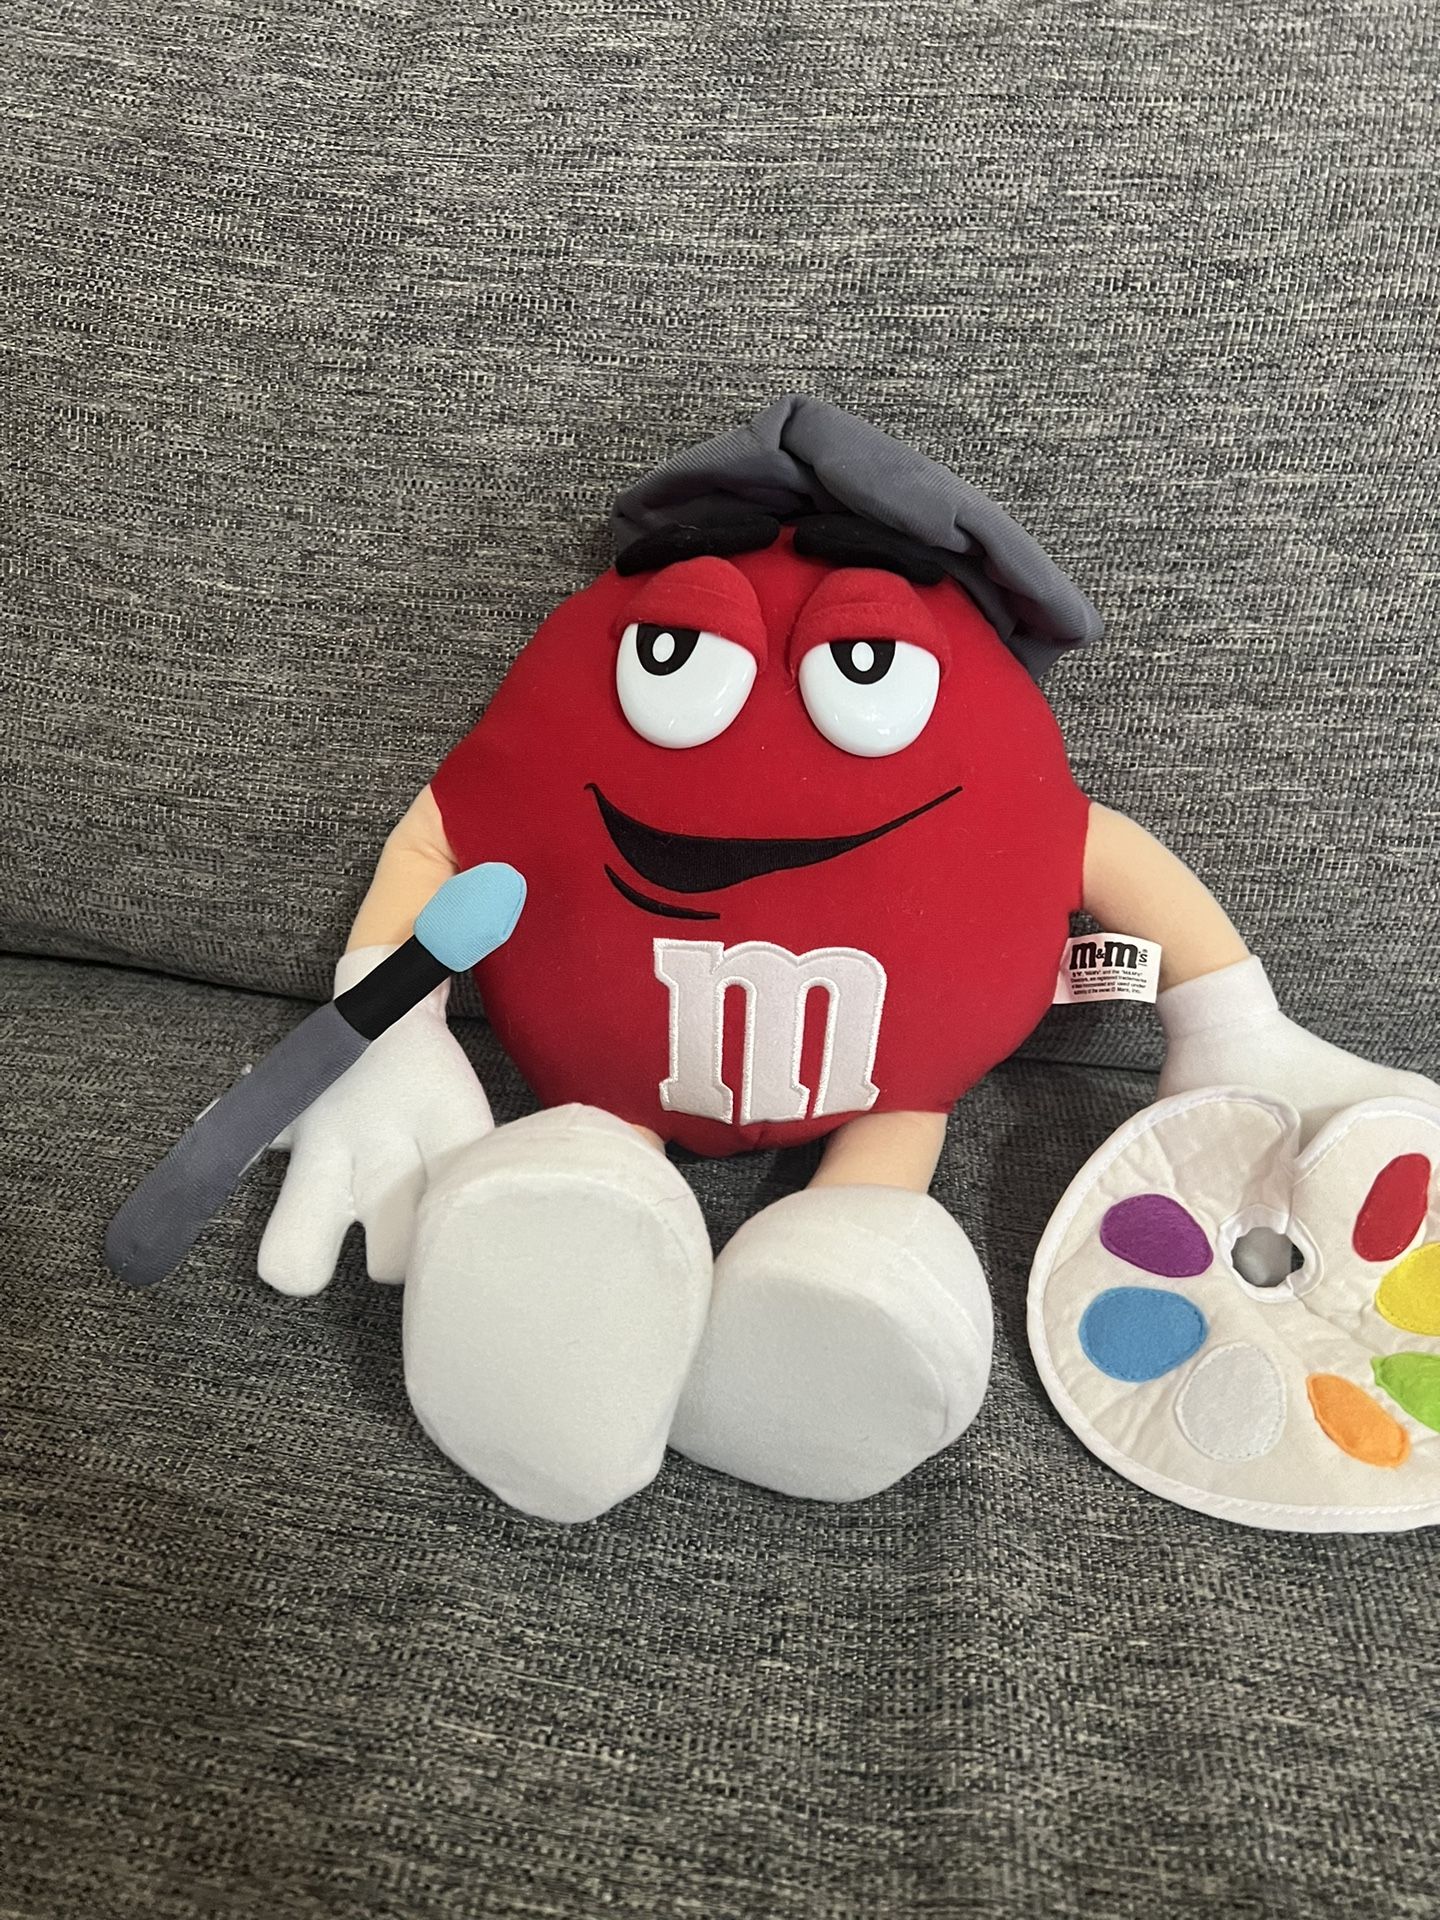 Red M & Ms plush Stuffed animal 12 inches high with artist palette.